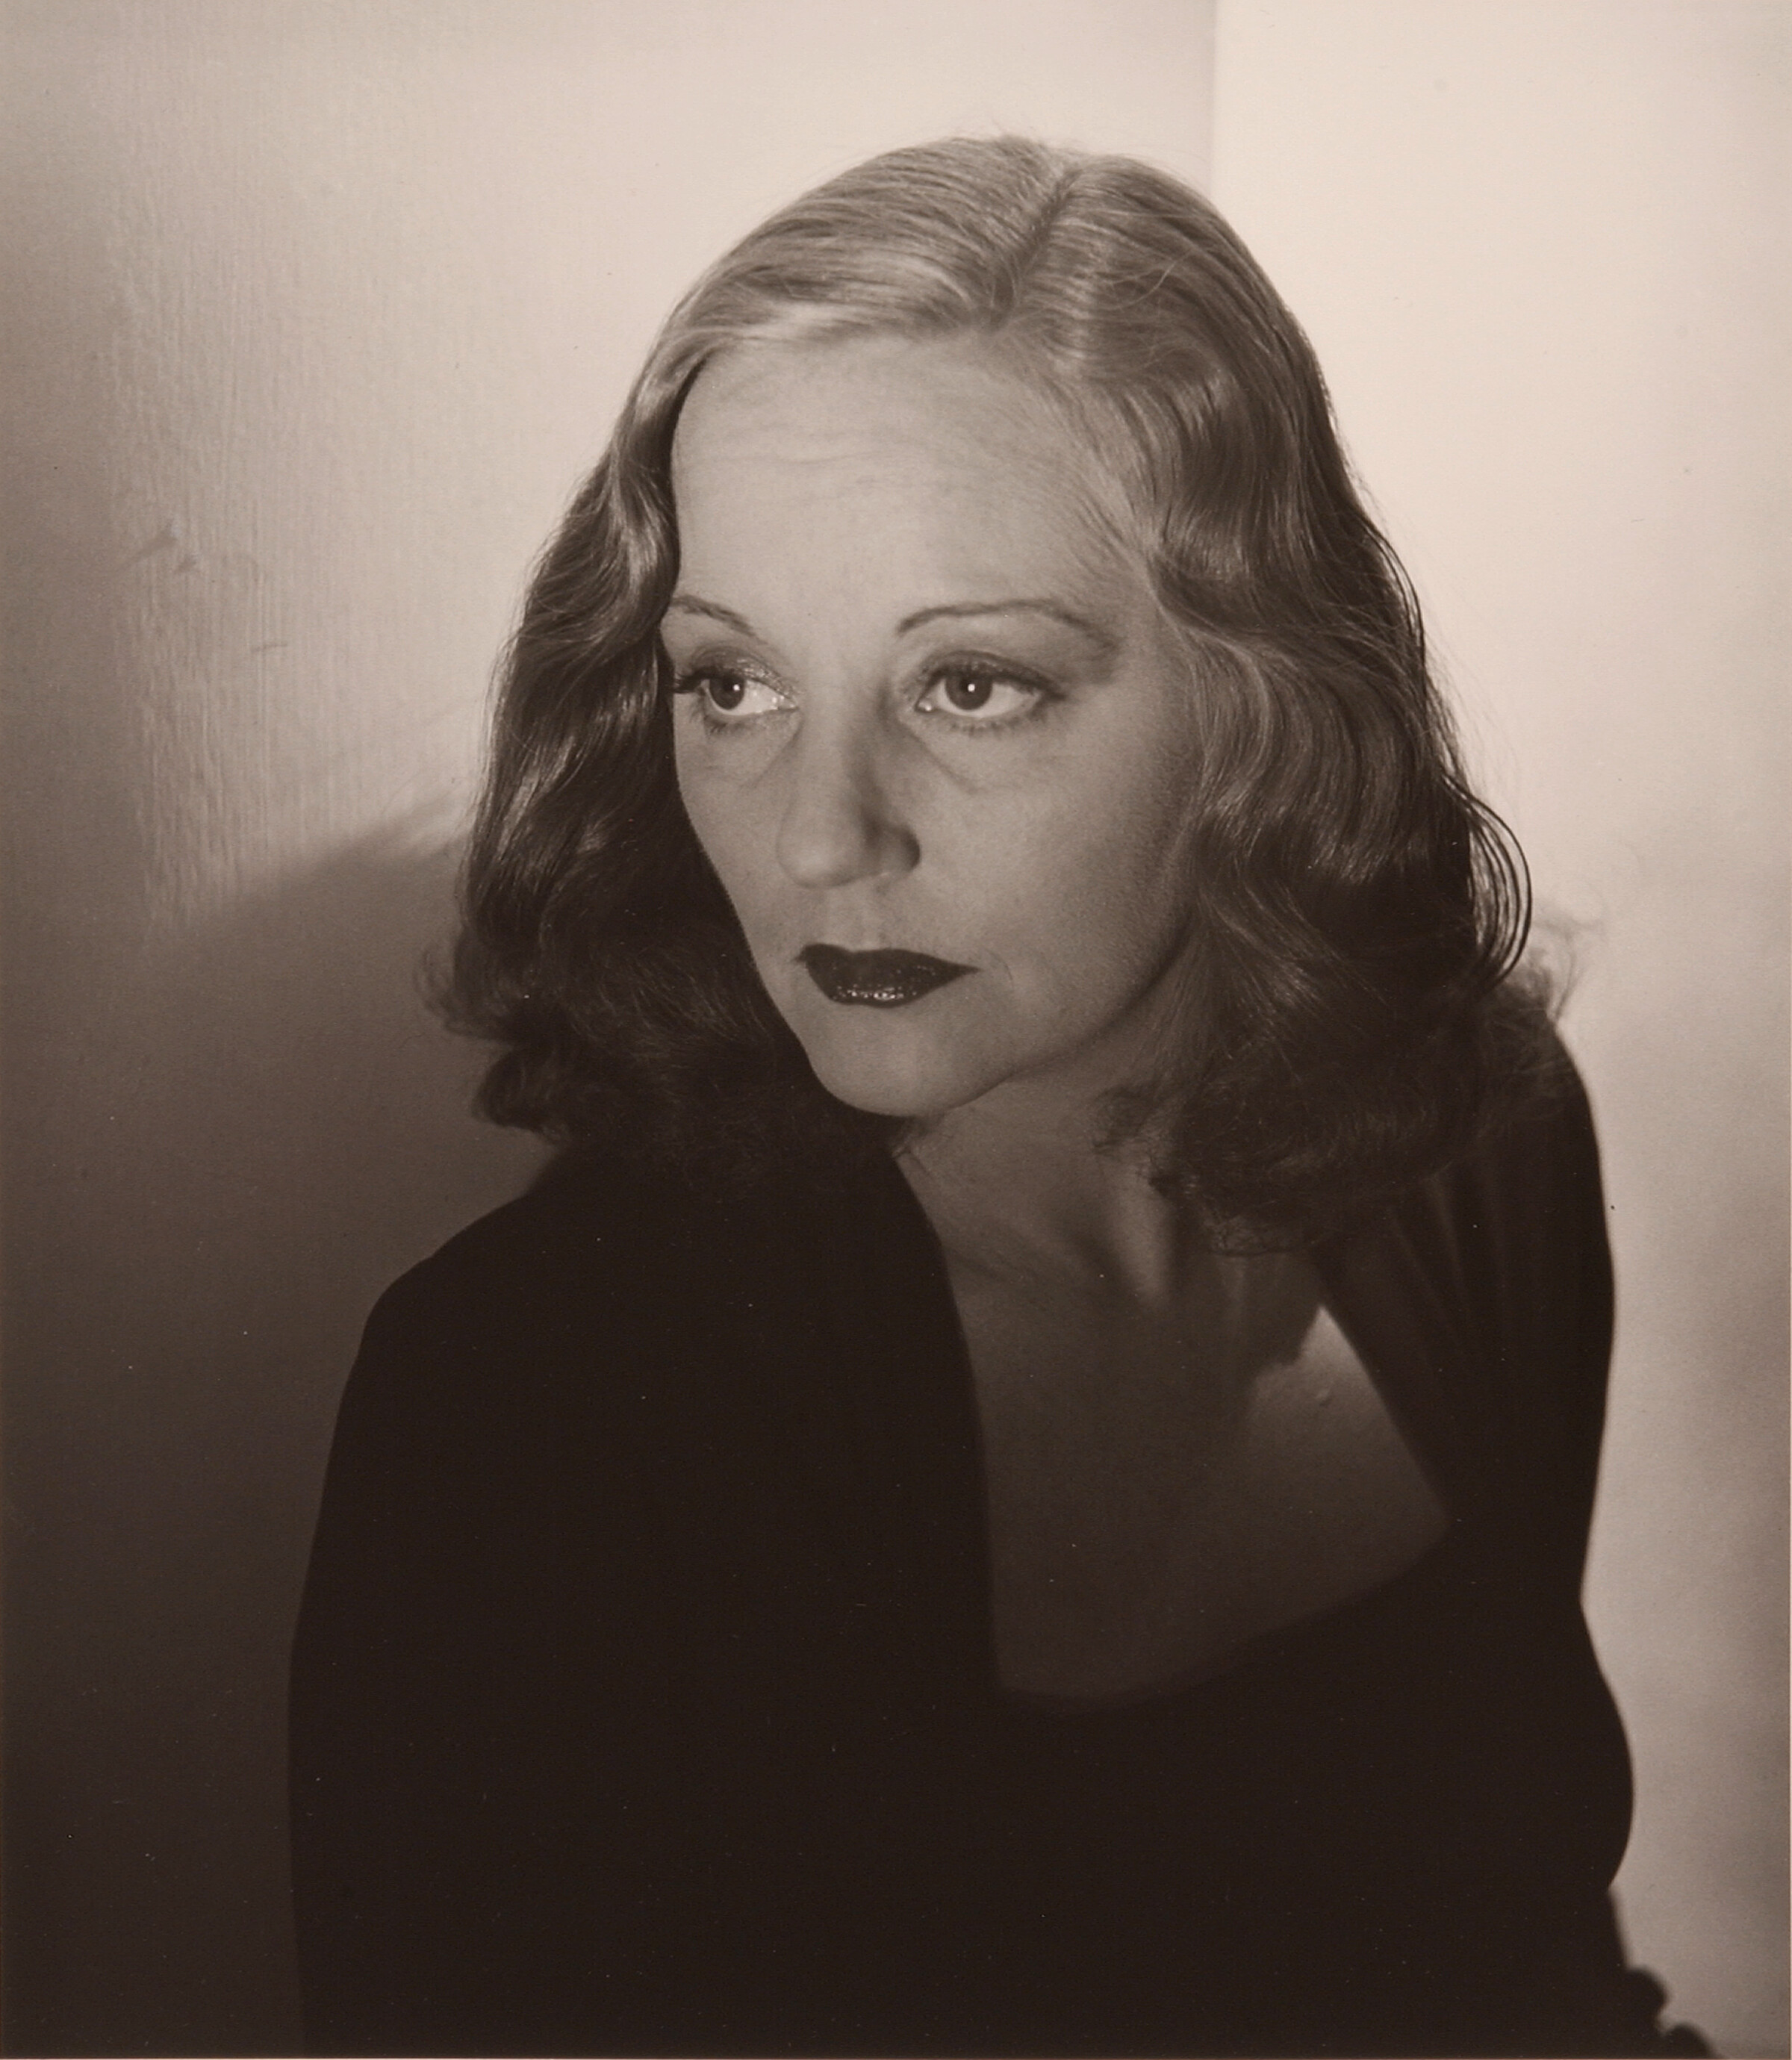 A black-and-white photograph of a woman staring coldly off frame, to the left. She has thin eyebrows and wears dark lipstick; her light hair is worn at shoulder-length, with subtle waves. She wears a dark cardigan over a dark, low-cut top. The photograph’s lighting is dramatic, with shadow in the bottom half, and light from the woman’s eyes upward. 